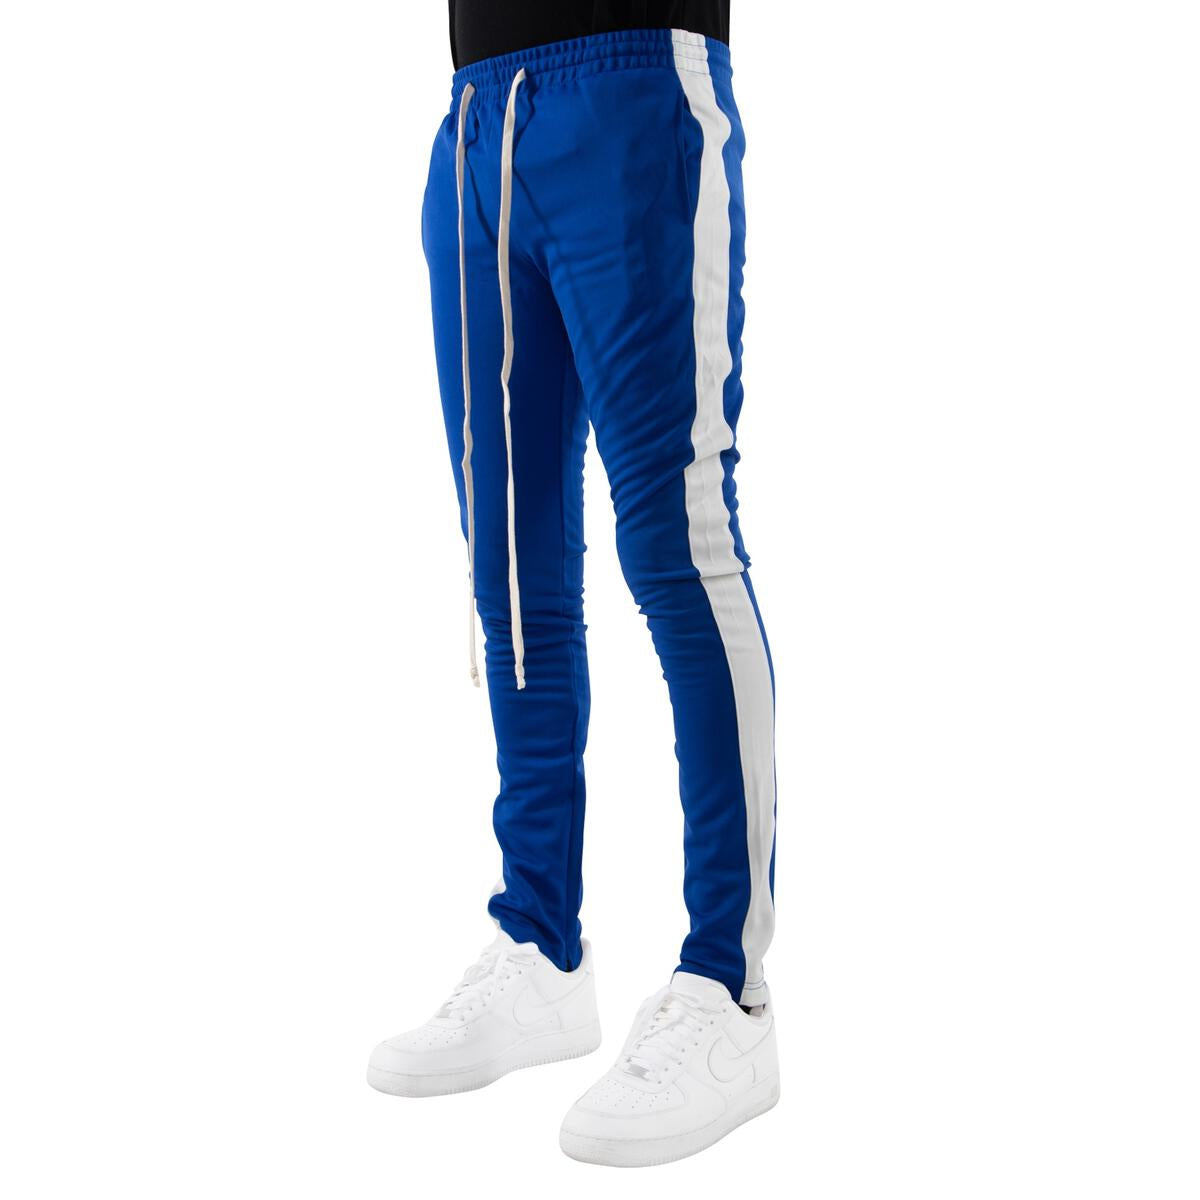 Track Pants In Blue/White